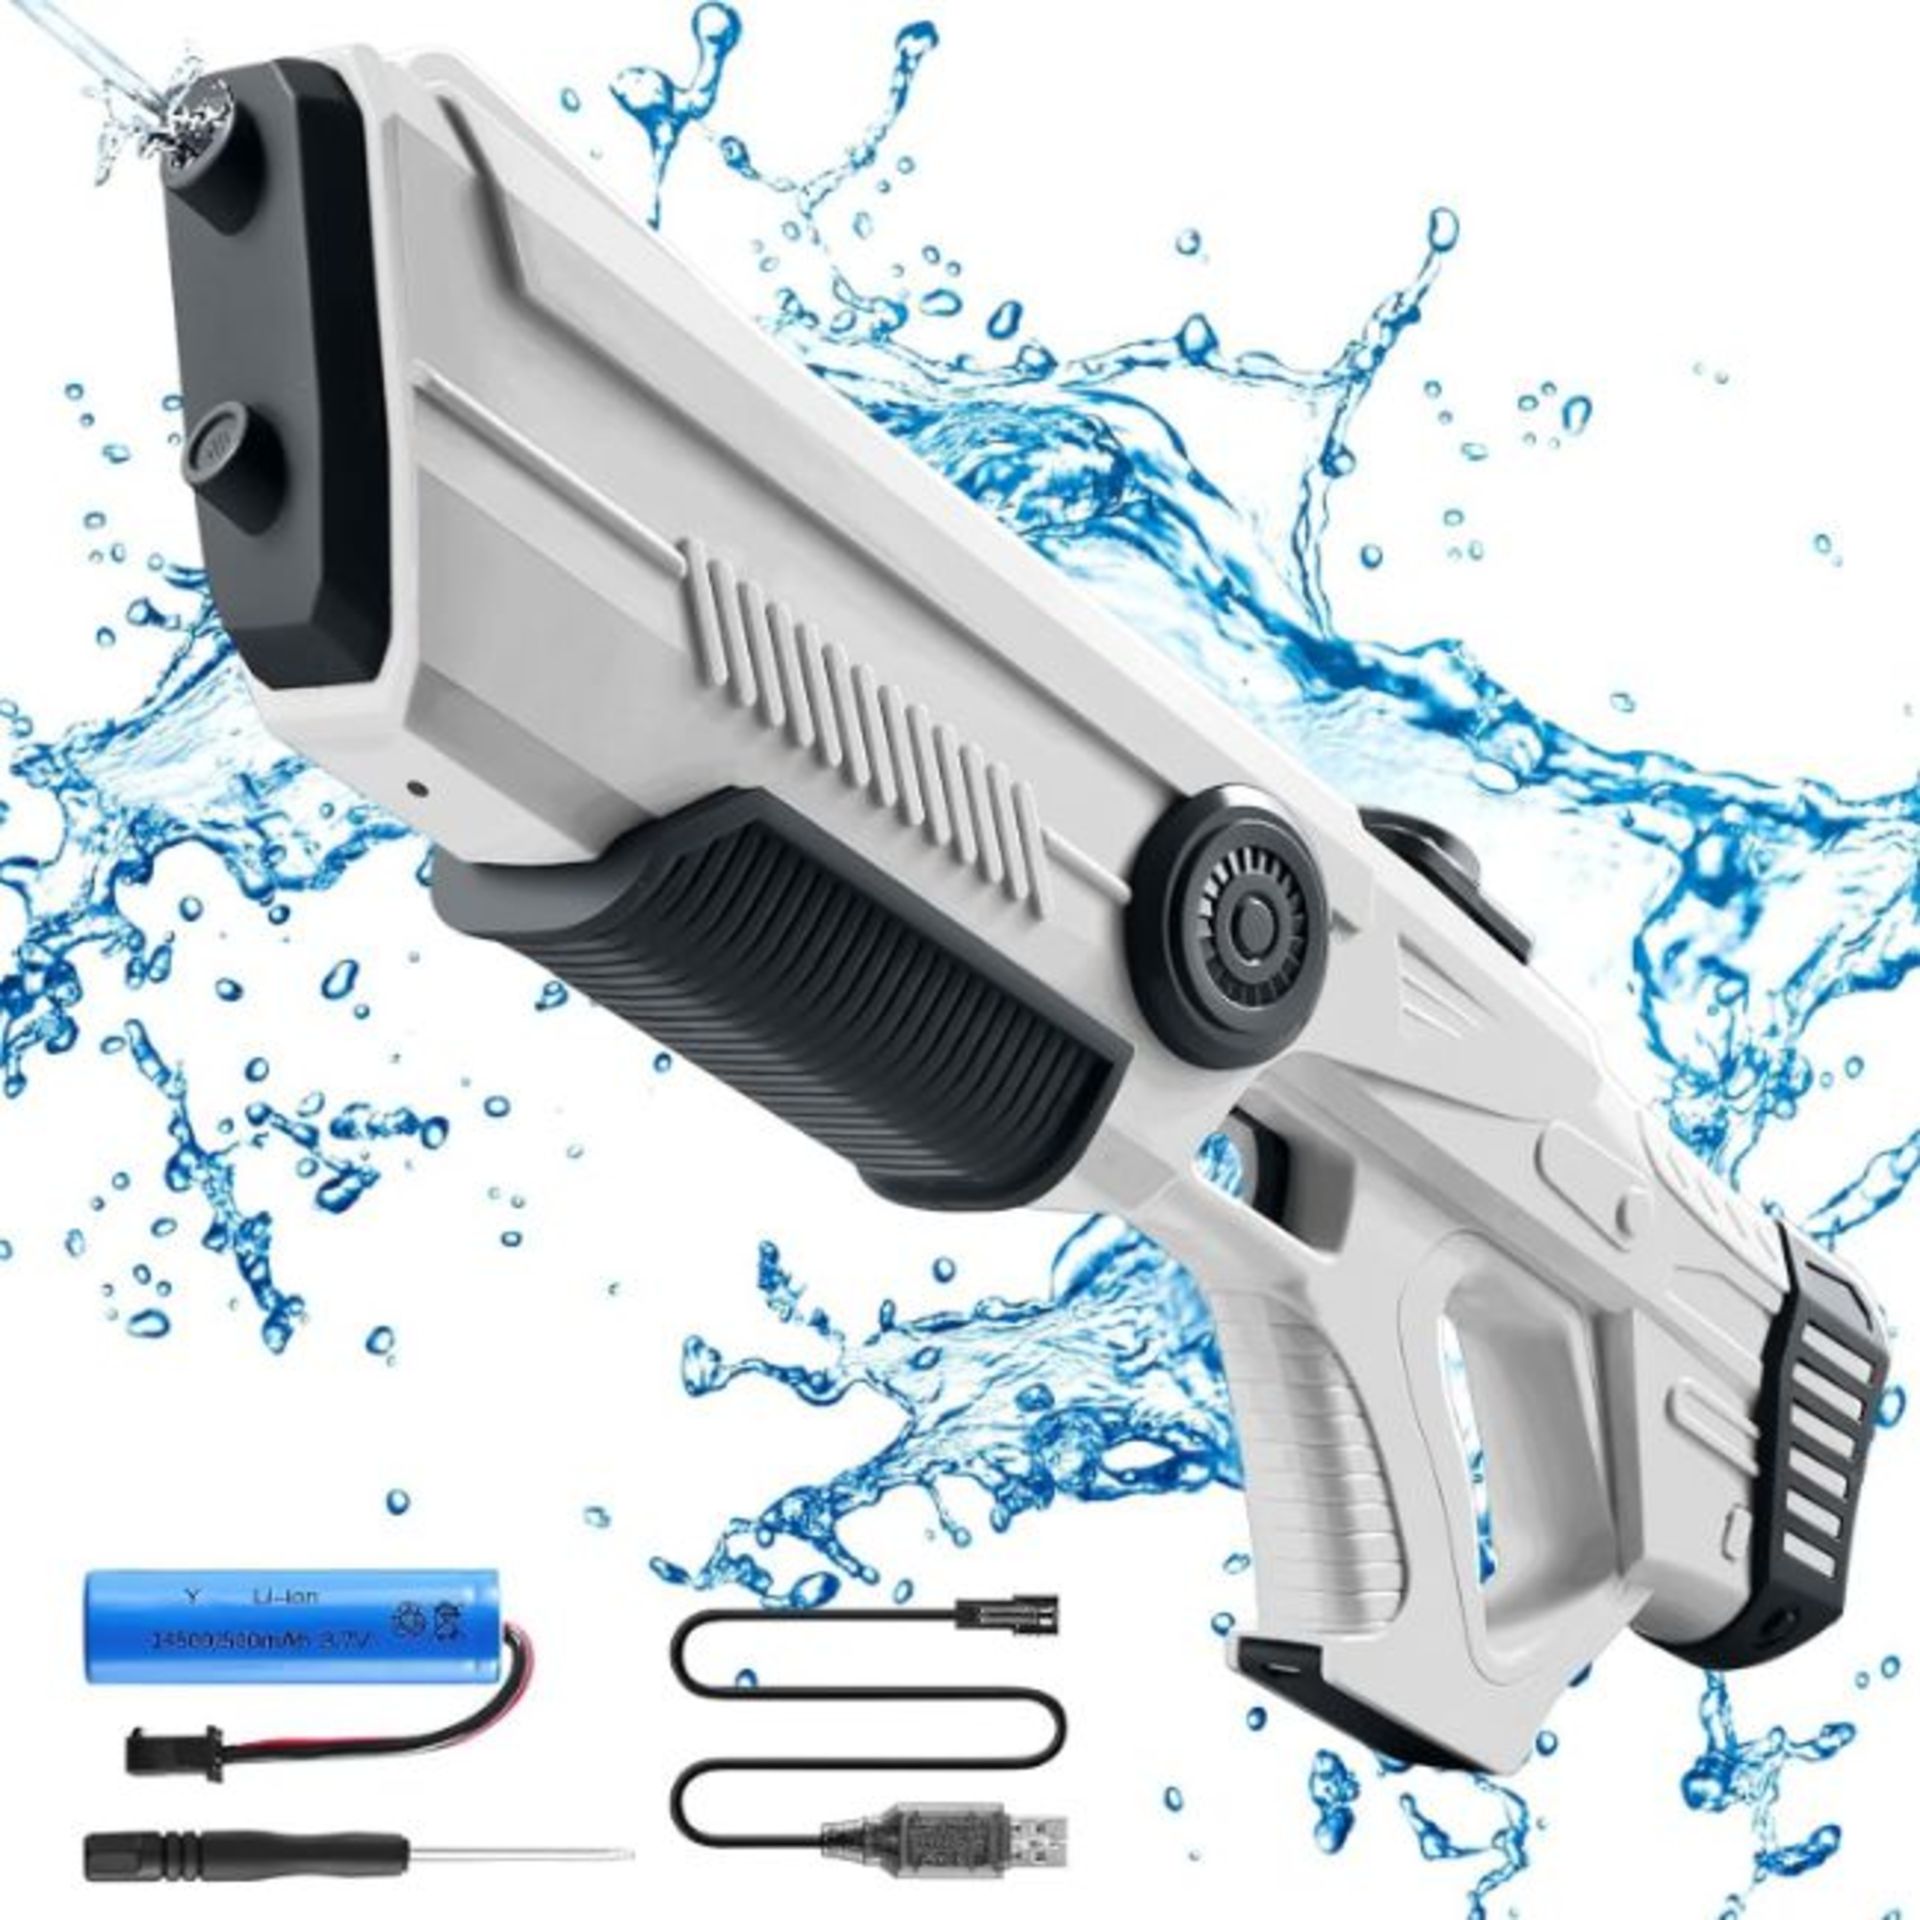 RRP £23.99 Electric Water Gun, One-Button Automatic Water Pistol for Kids Adults, 20-32FT Range